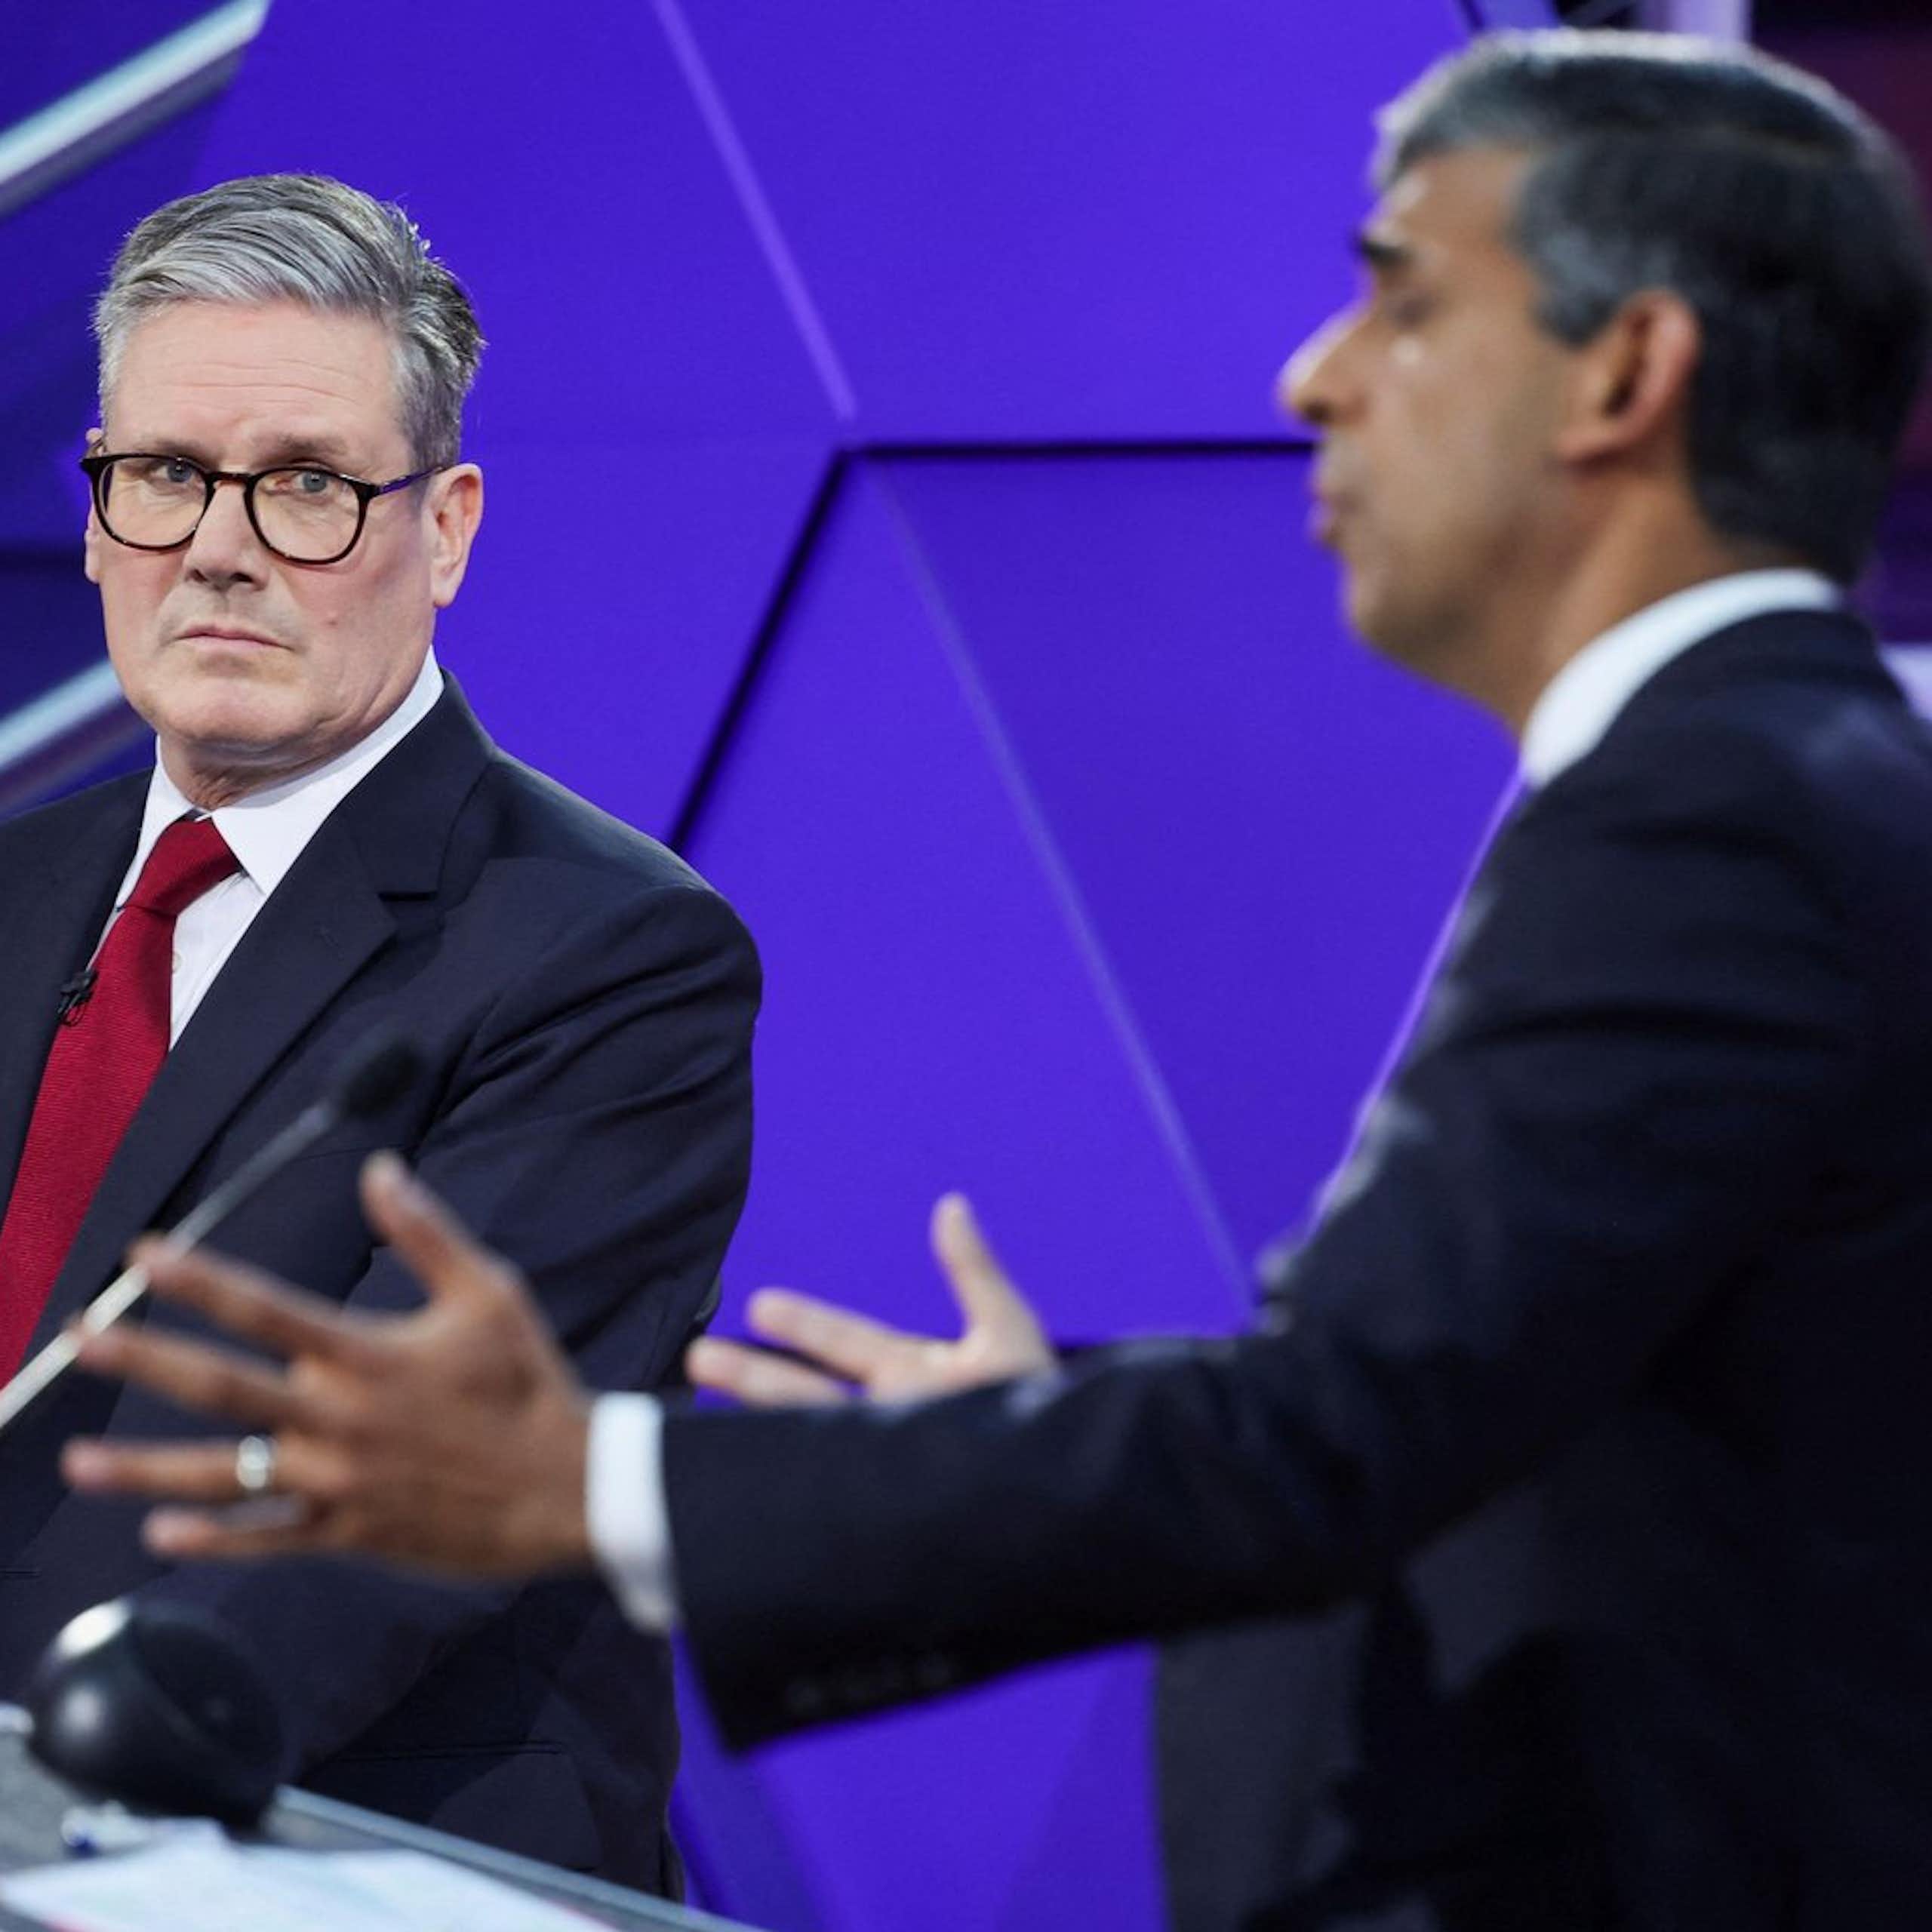 There was a telling difference between Rishi Sunak and Keir Starmer’s use of pronouns in the final election debate